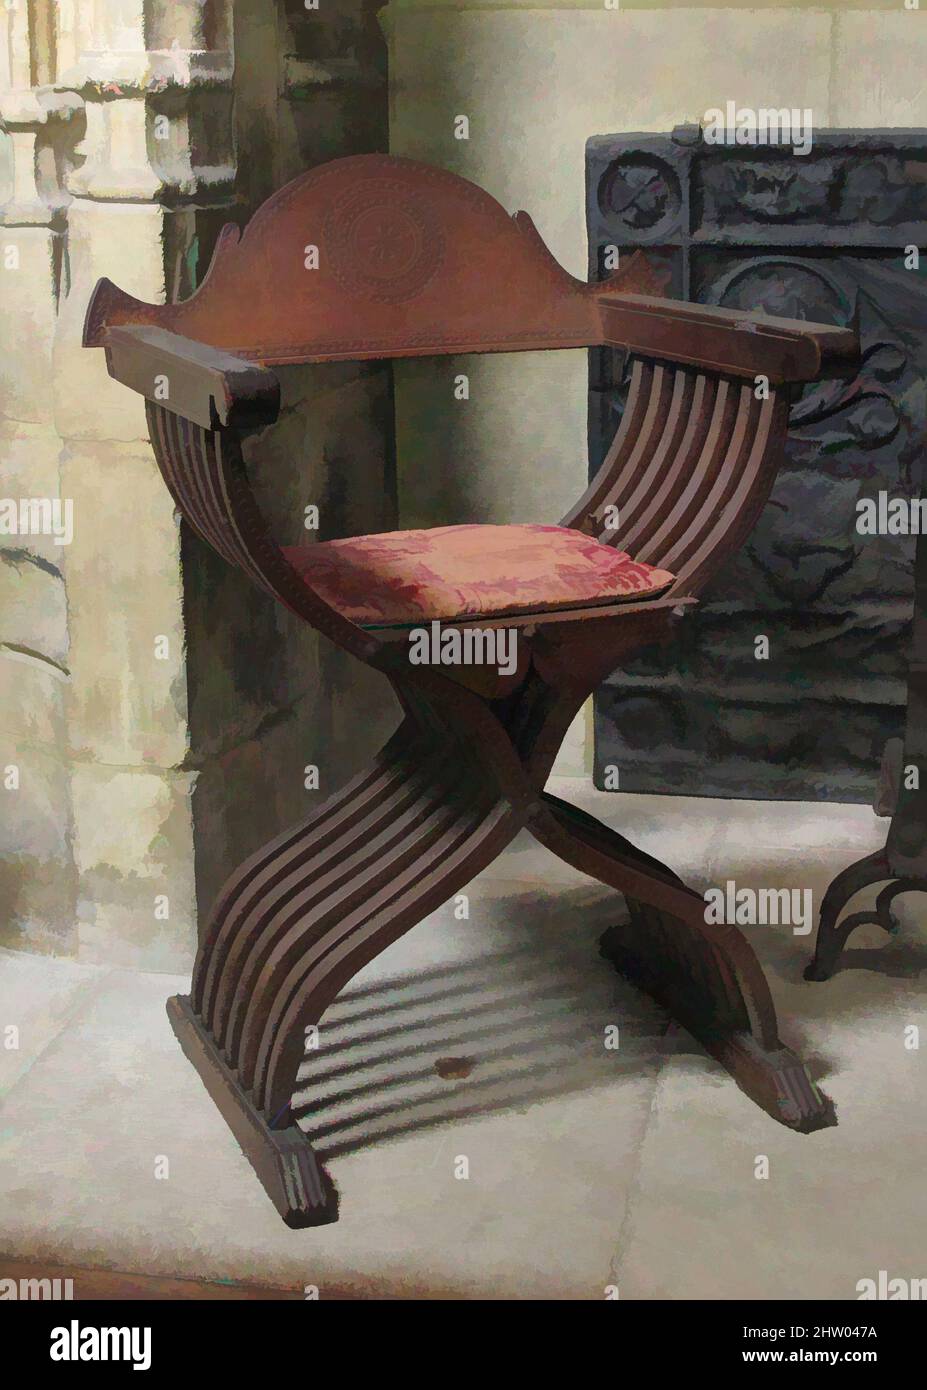 Art inspired by Folding Armchair, late 15th or early 16th century, Italian, Walnut, Overall: 37 x 26 in. (94 x 66 cm), Woodwork-Furniture, Classic works modernized by Artotop with a splash of modernity. Shapes, color and value, eye-catching visual impact on art. Emotions through freedom of artworks in a contemporary way. A timeless message pursuing a wildly creative new direction. Artists turning to the digital medium and creating the Artotop NFT Stock Photo